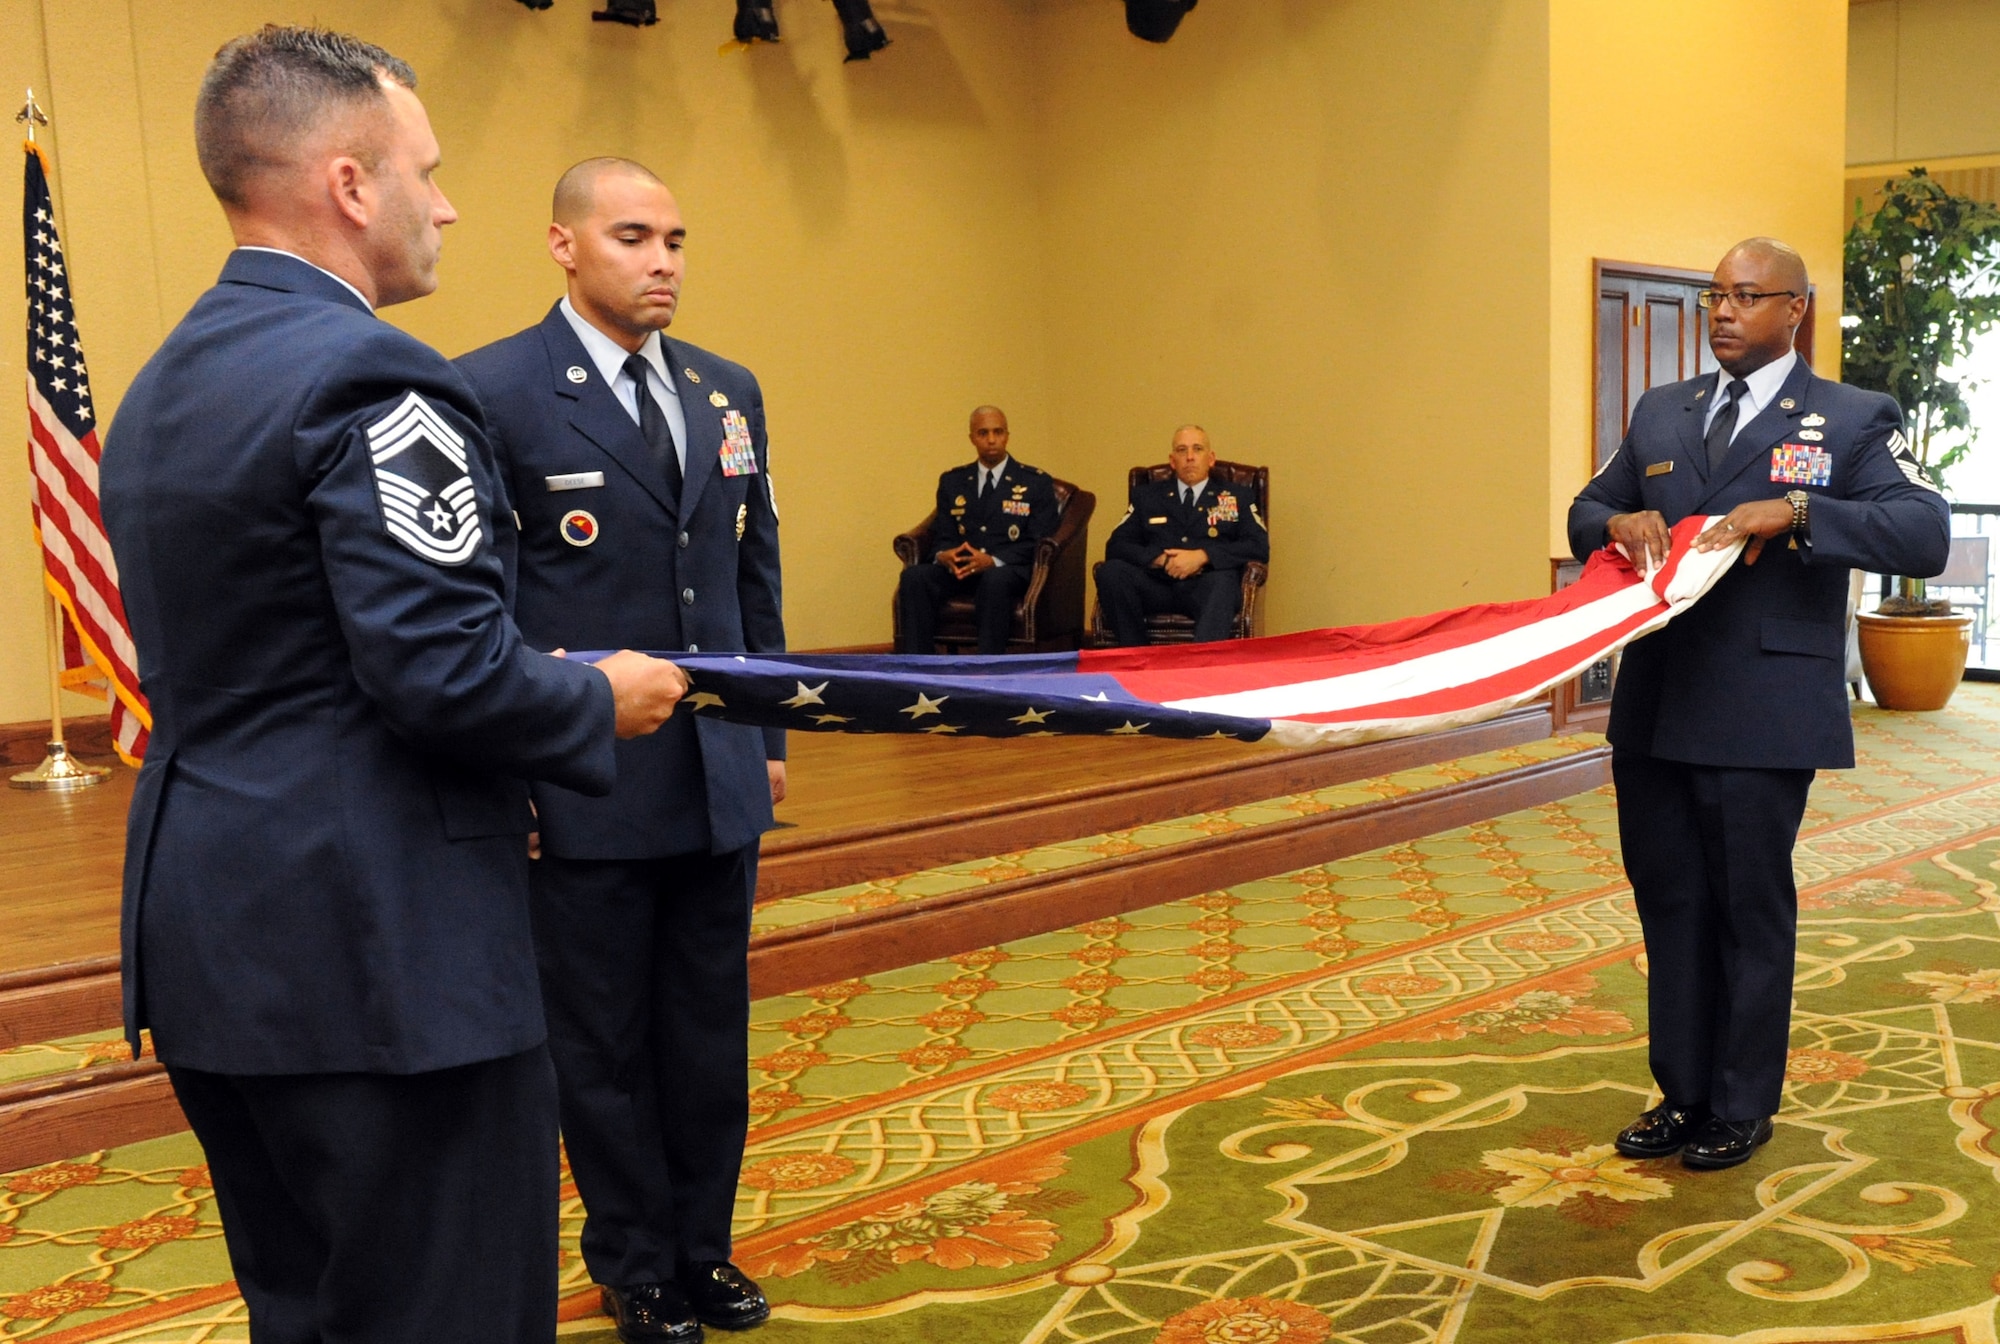 Members of the Keesler Chief’s Group conduct a flag folding ceremony during the retirement ceremony for Chief Master Sgt. Robert Winters, 81st Training Group superintendent, at the Bay Breeze Event Center Sept. 8, 2016, on Keesler Air Force Base, Miss. Winters retired with more than 29 years of military service and served multiple assignments in California, Louisiana, Georgia, Colorado, Korea and the United Kingdom. He also worked as an electronic warfare officer in support of more than 700 soldiers in multiple locations throughout Iraq. (U.S. Air Force photo by Kemberly Groue/Released)